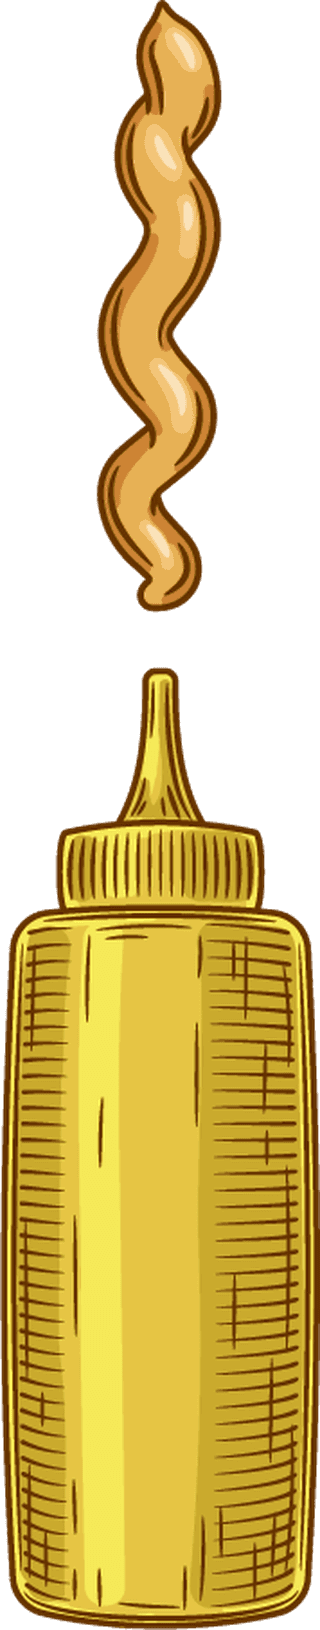 vectorillustration-engraving-style-different-sauces-are-poured-from-bottles-515502